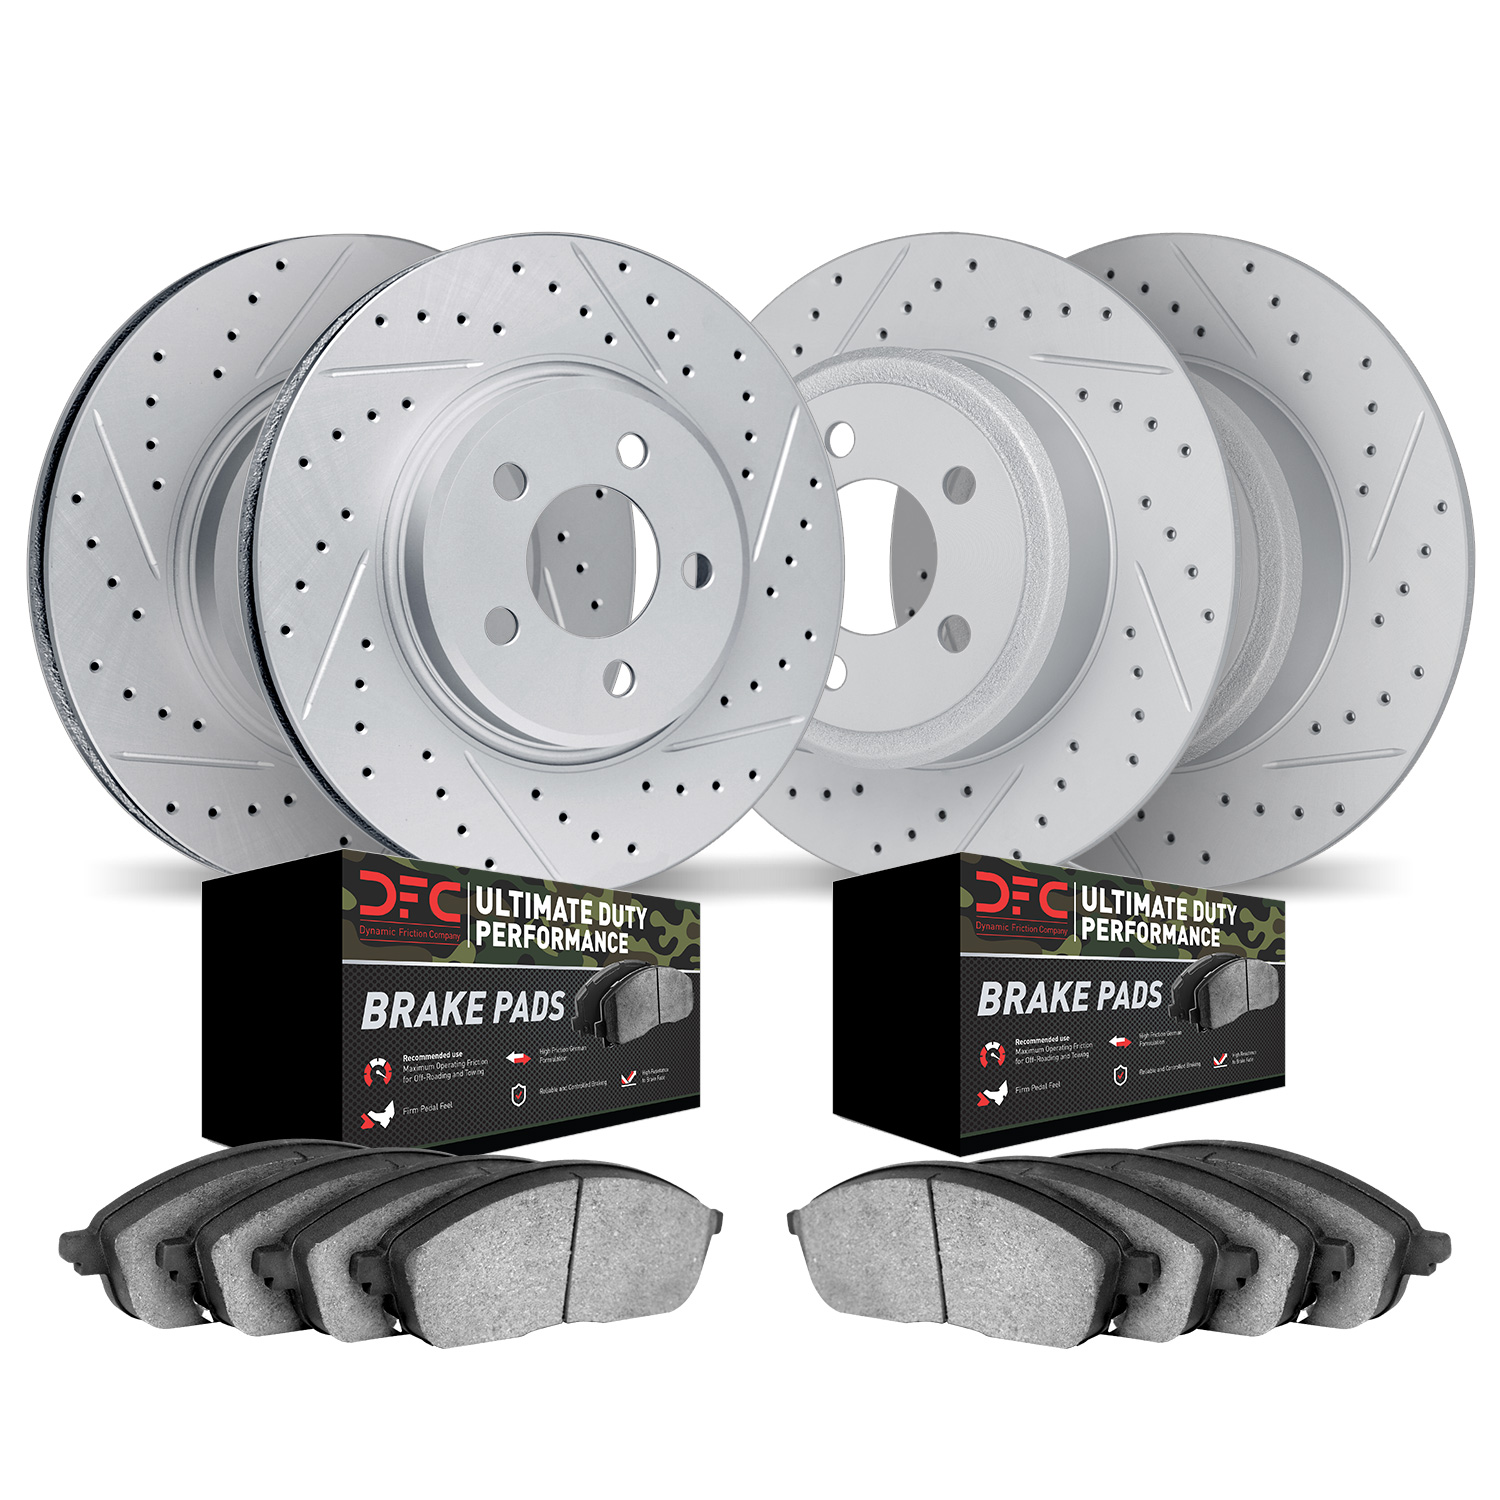 2404-54002 Geoperformance Drilled/Slotted Brake Rotors with Ultimate-Duty Brake Pads Kit, 2001-2002 Ford/Lincoln/Mercury/Mazda,